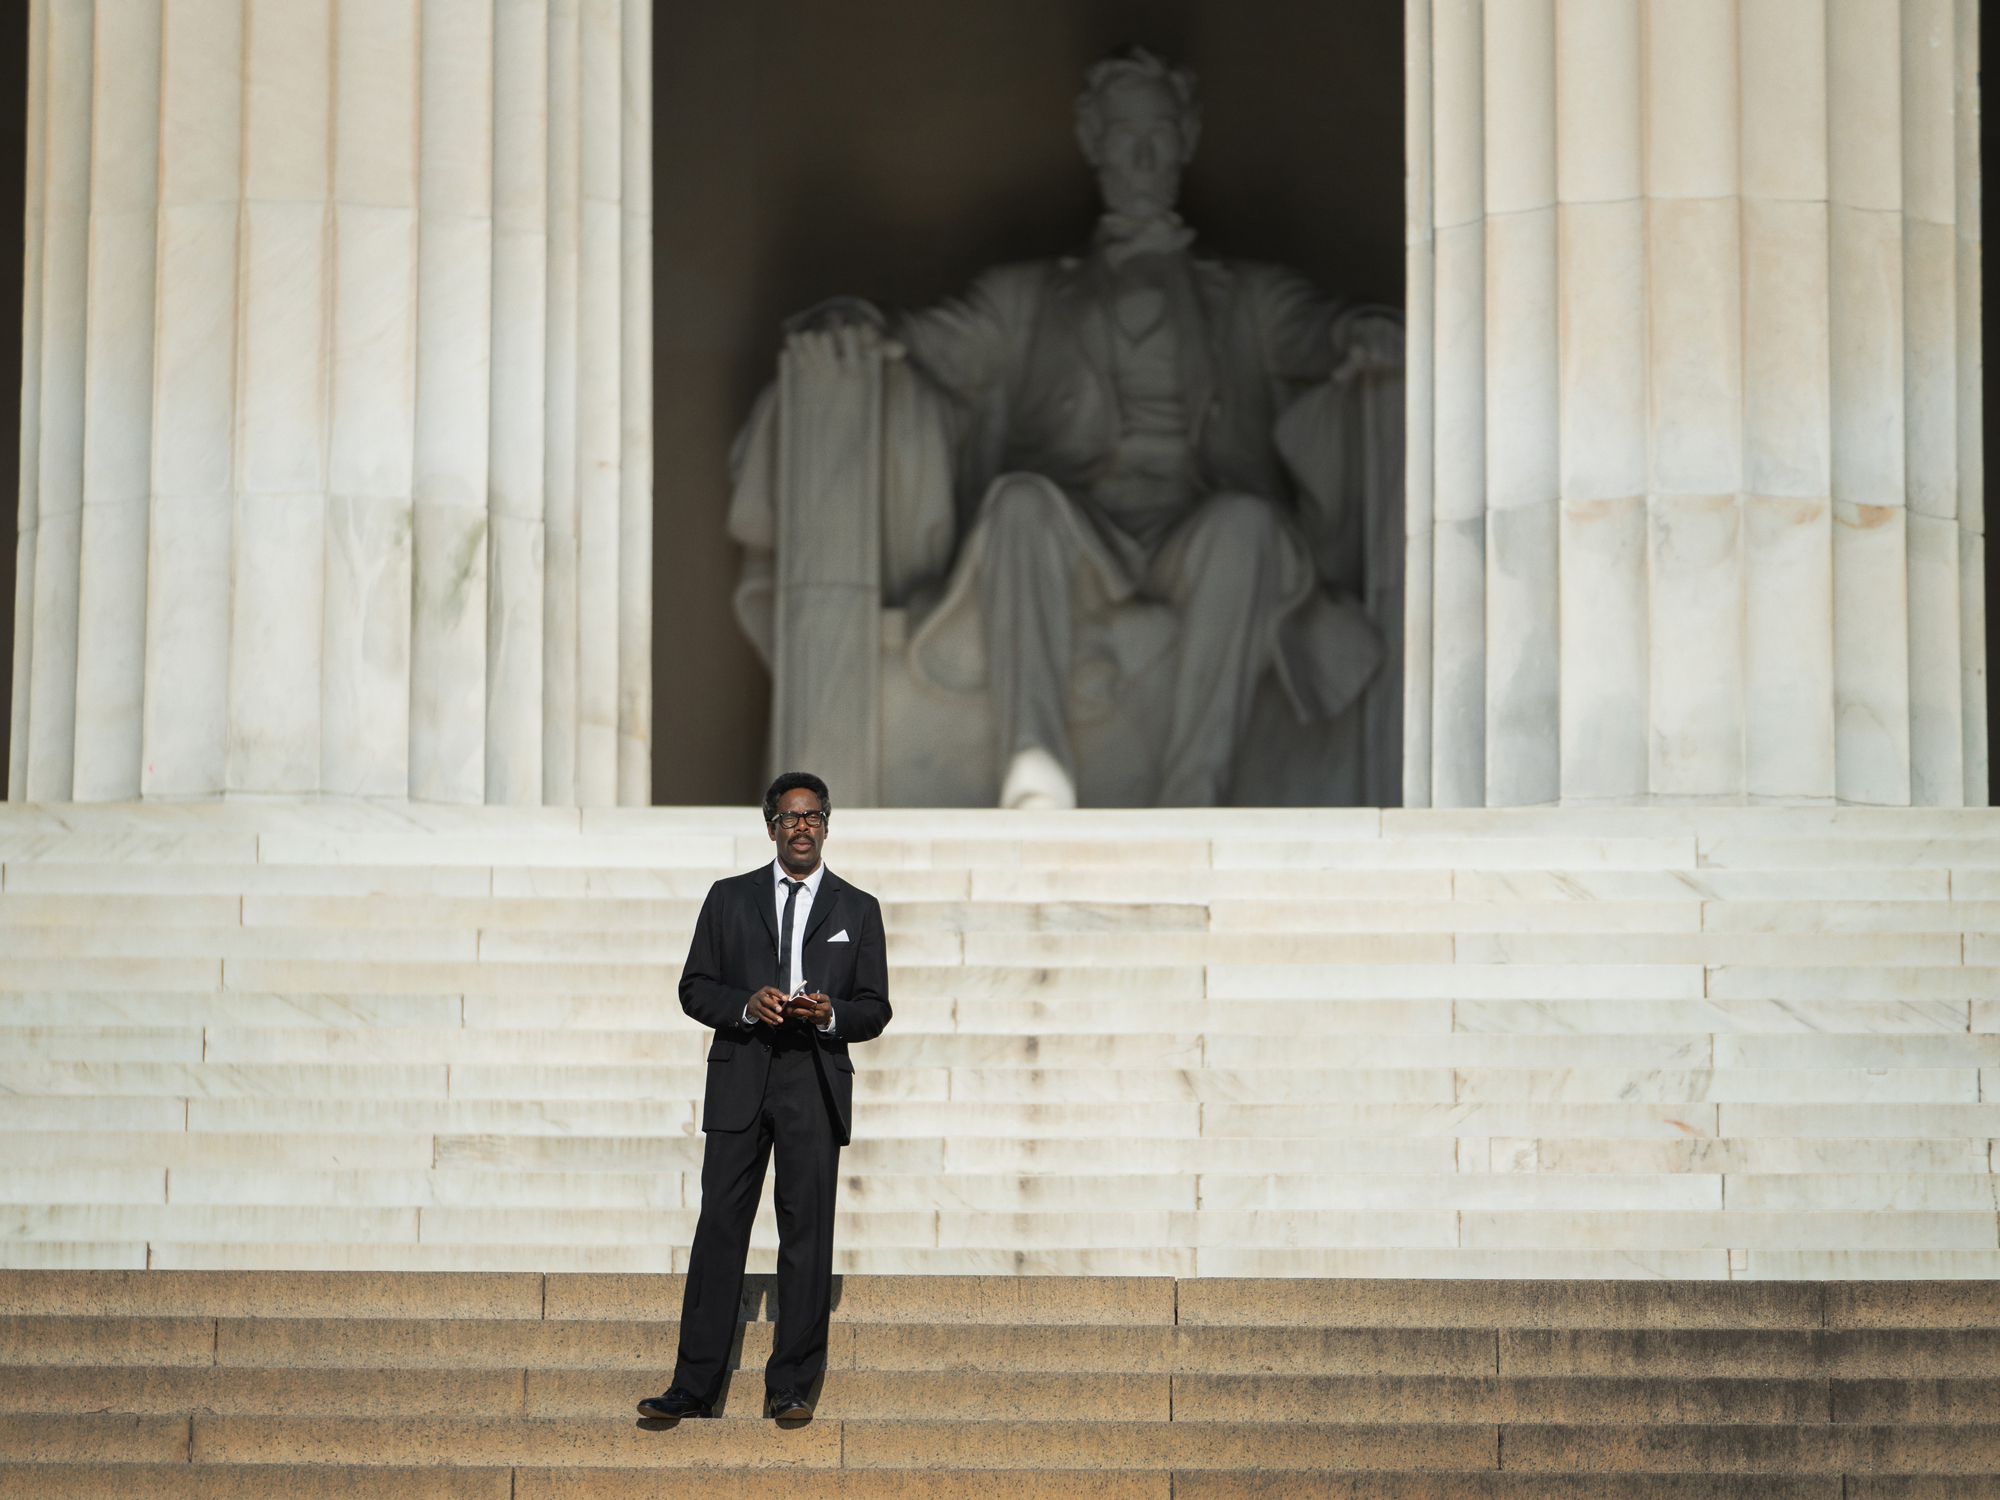 A Black man in a black suit stands on the Lincoln Memorial steps, small against the architecture and memorial